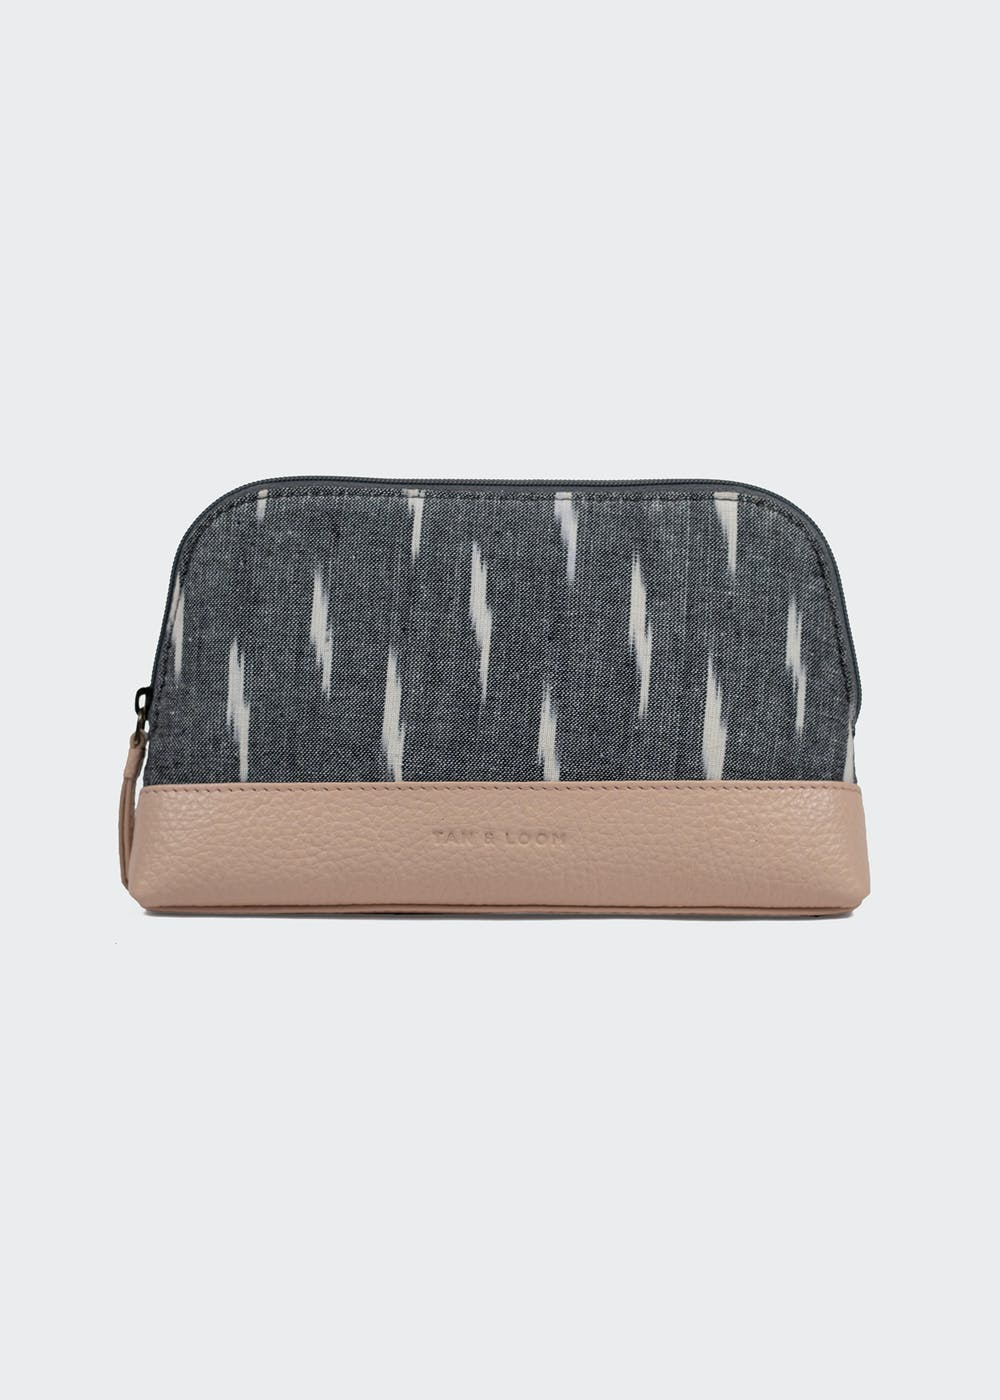 Grey Ikat & Contrast Base Make Up Pouch - Pink